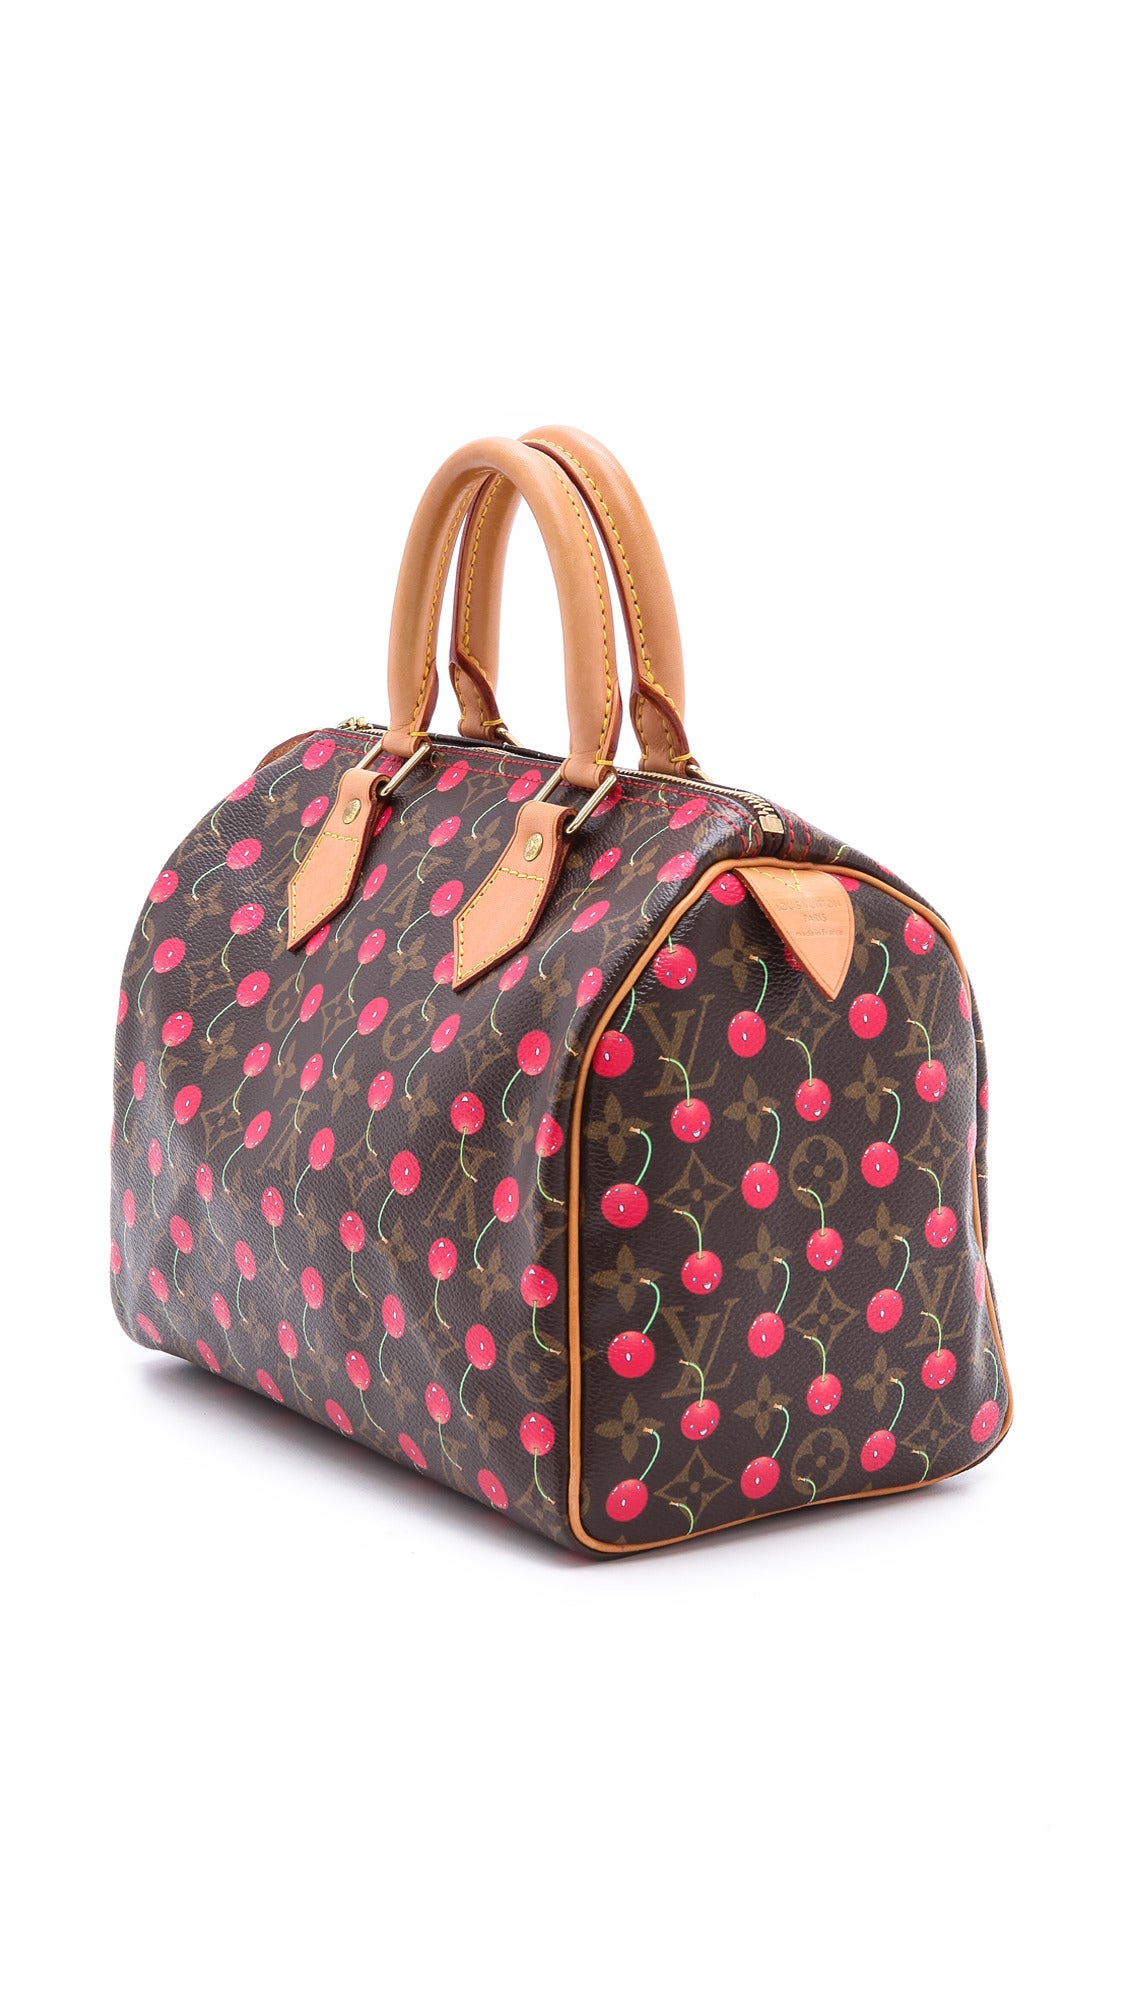 louis vuitton with cherries